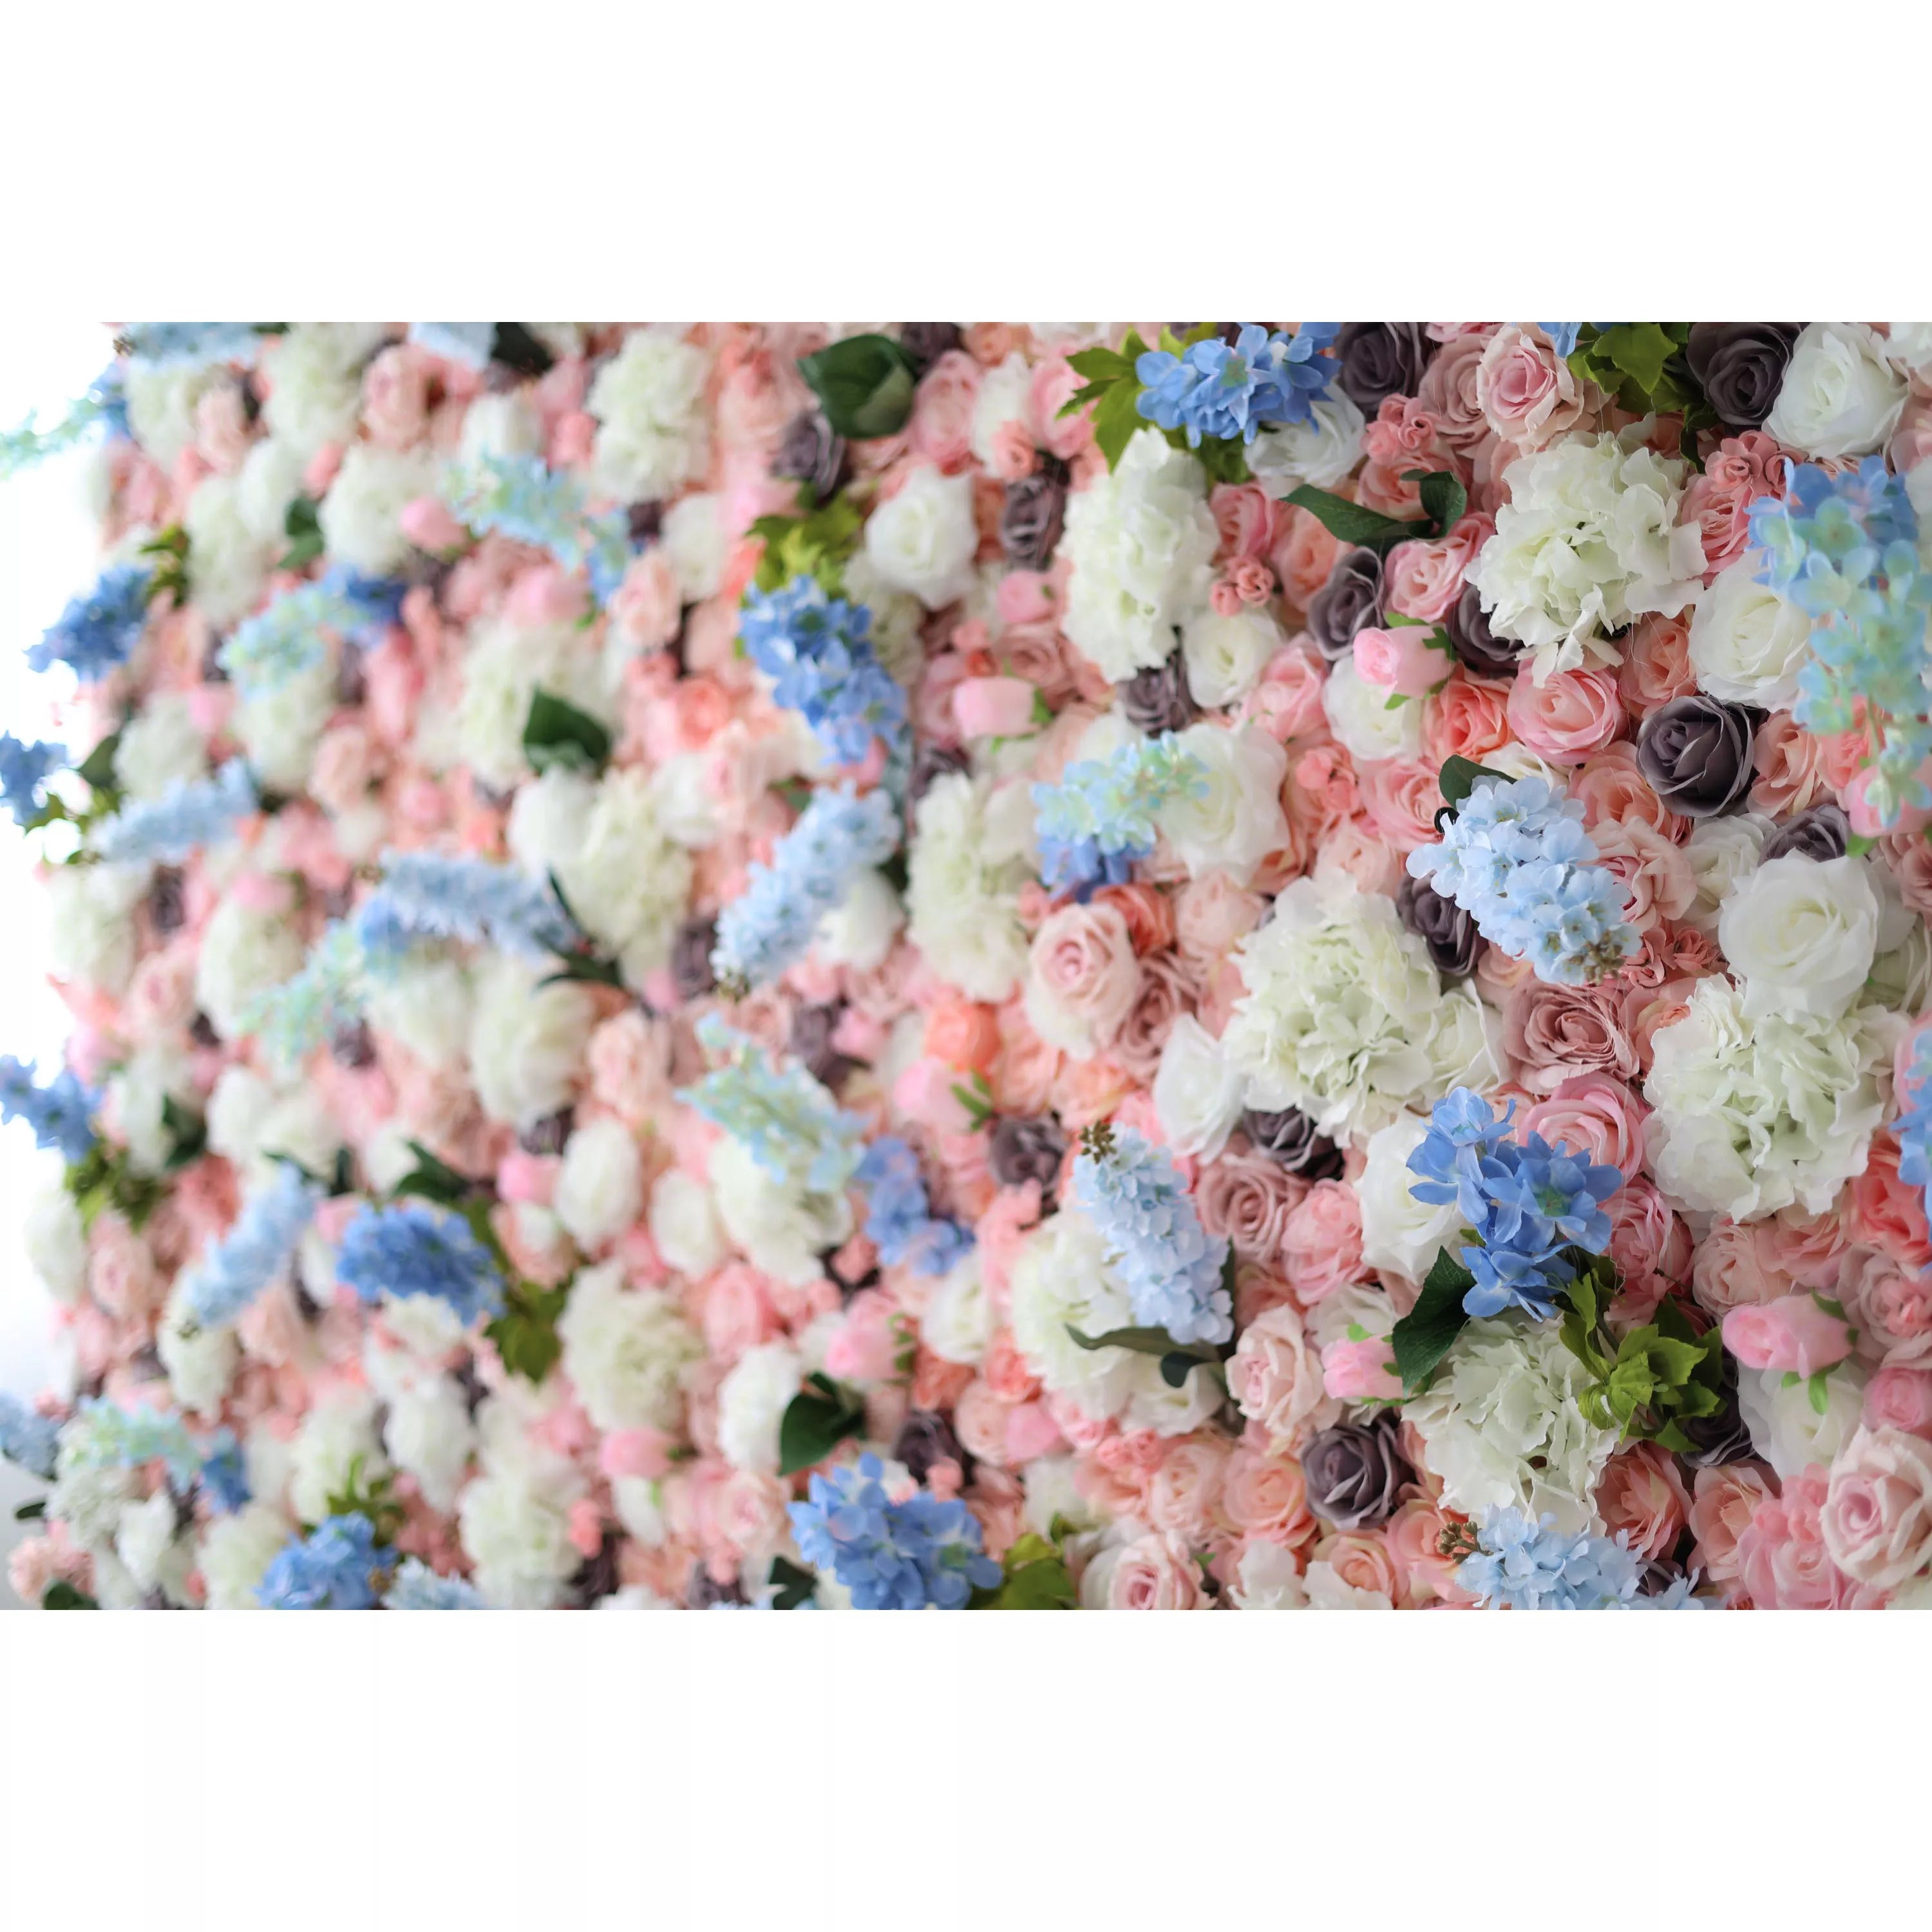 Valar Flowers roll up fabric artificial flower wall for wedding backdrop, floral party decor, and event photography, model VF-1281